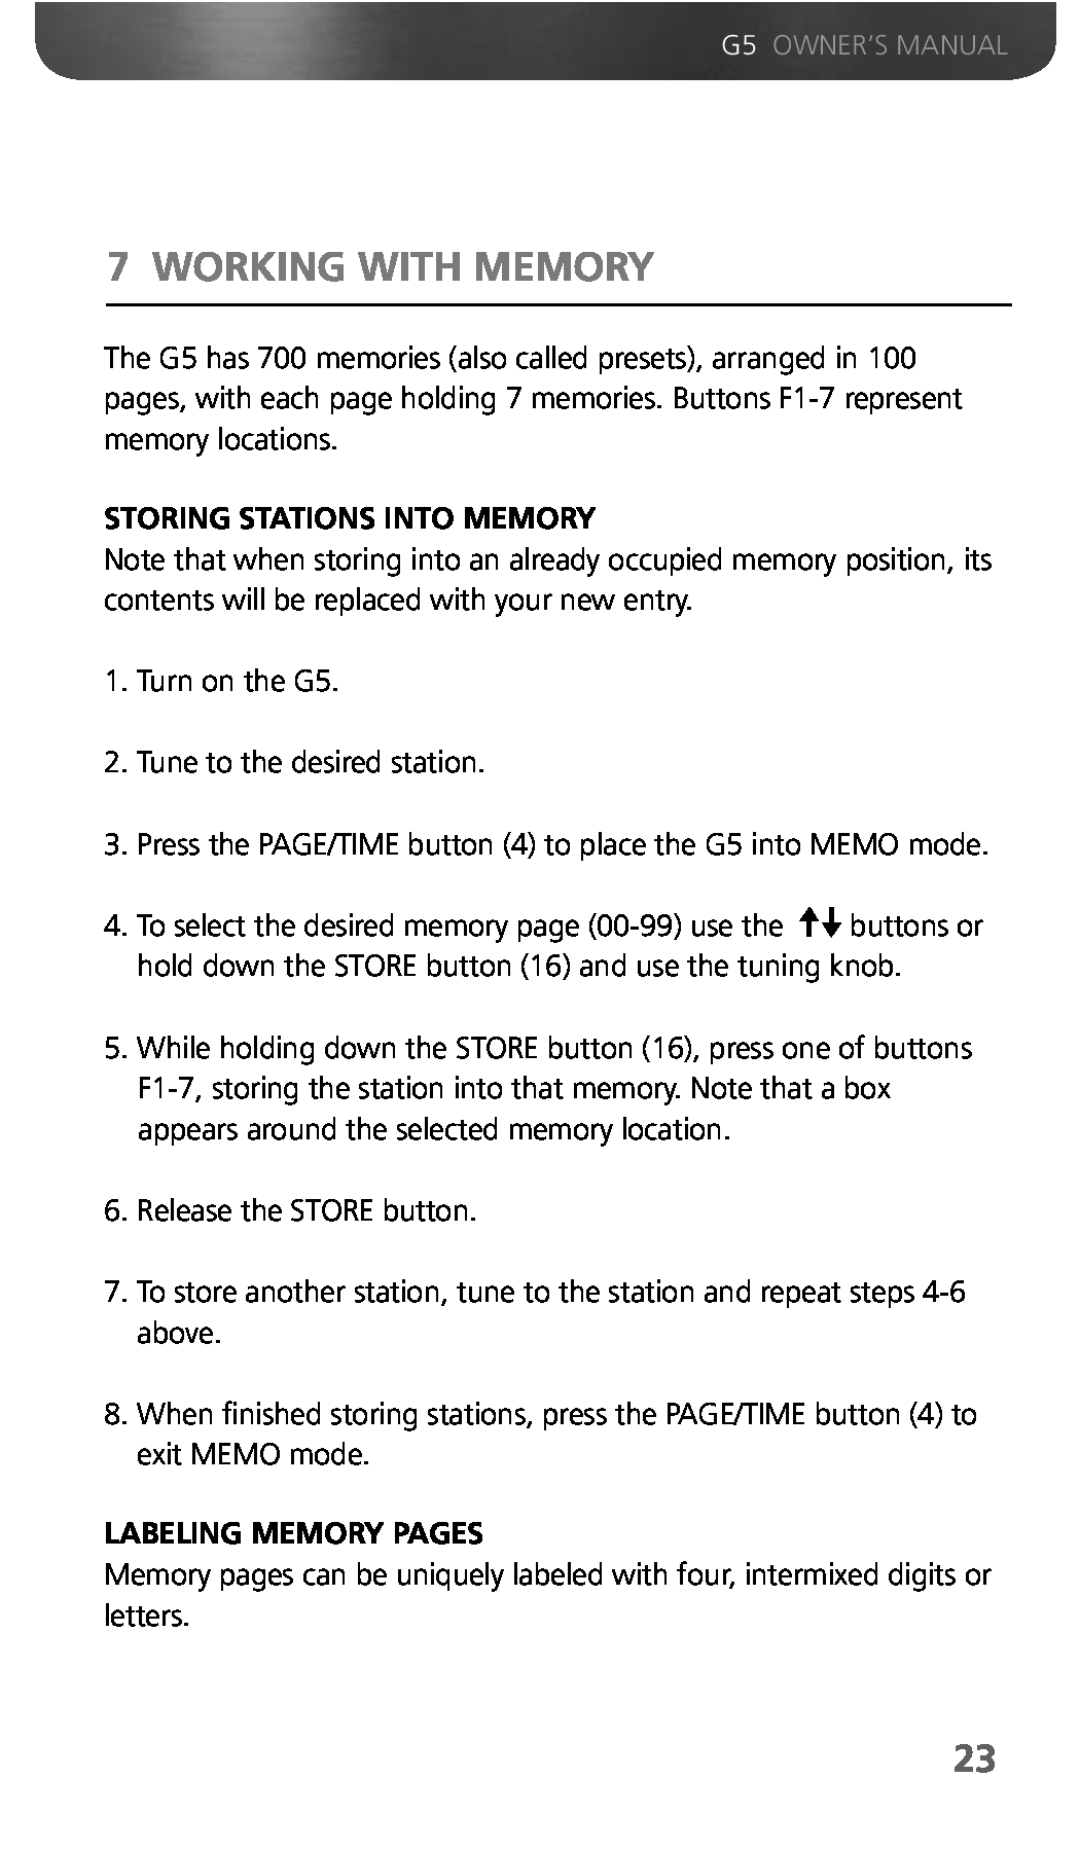 Eton G5 owner manual Working With Memory, Storing Stations Into Memory, Labeling Memory Pages 